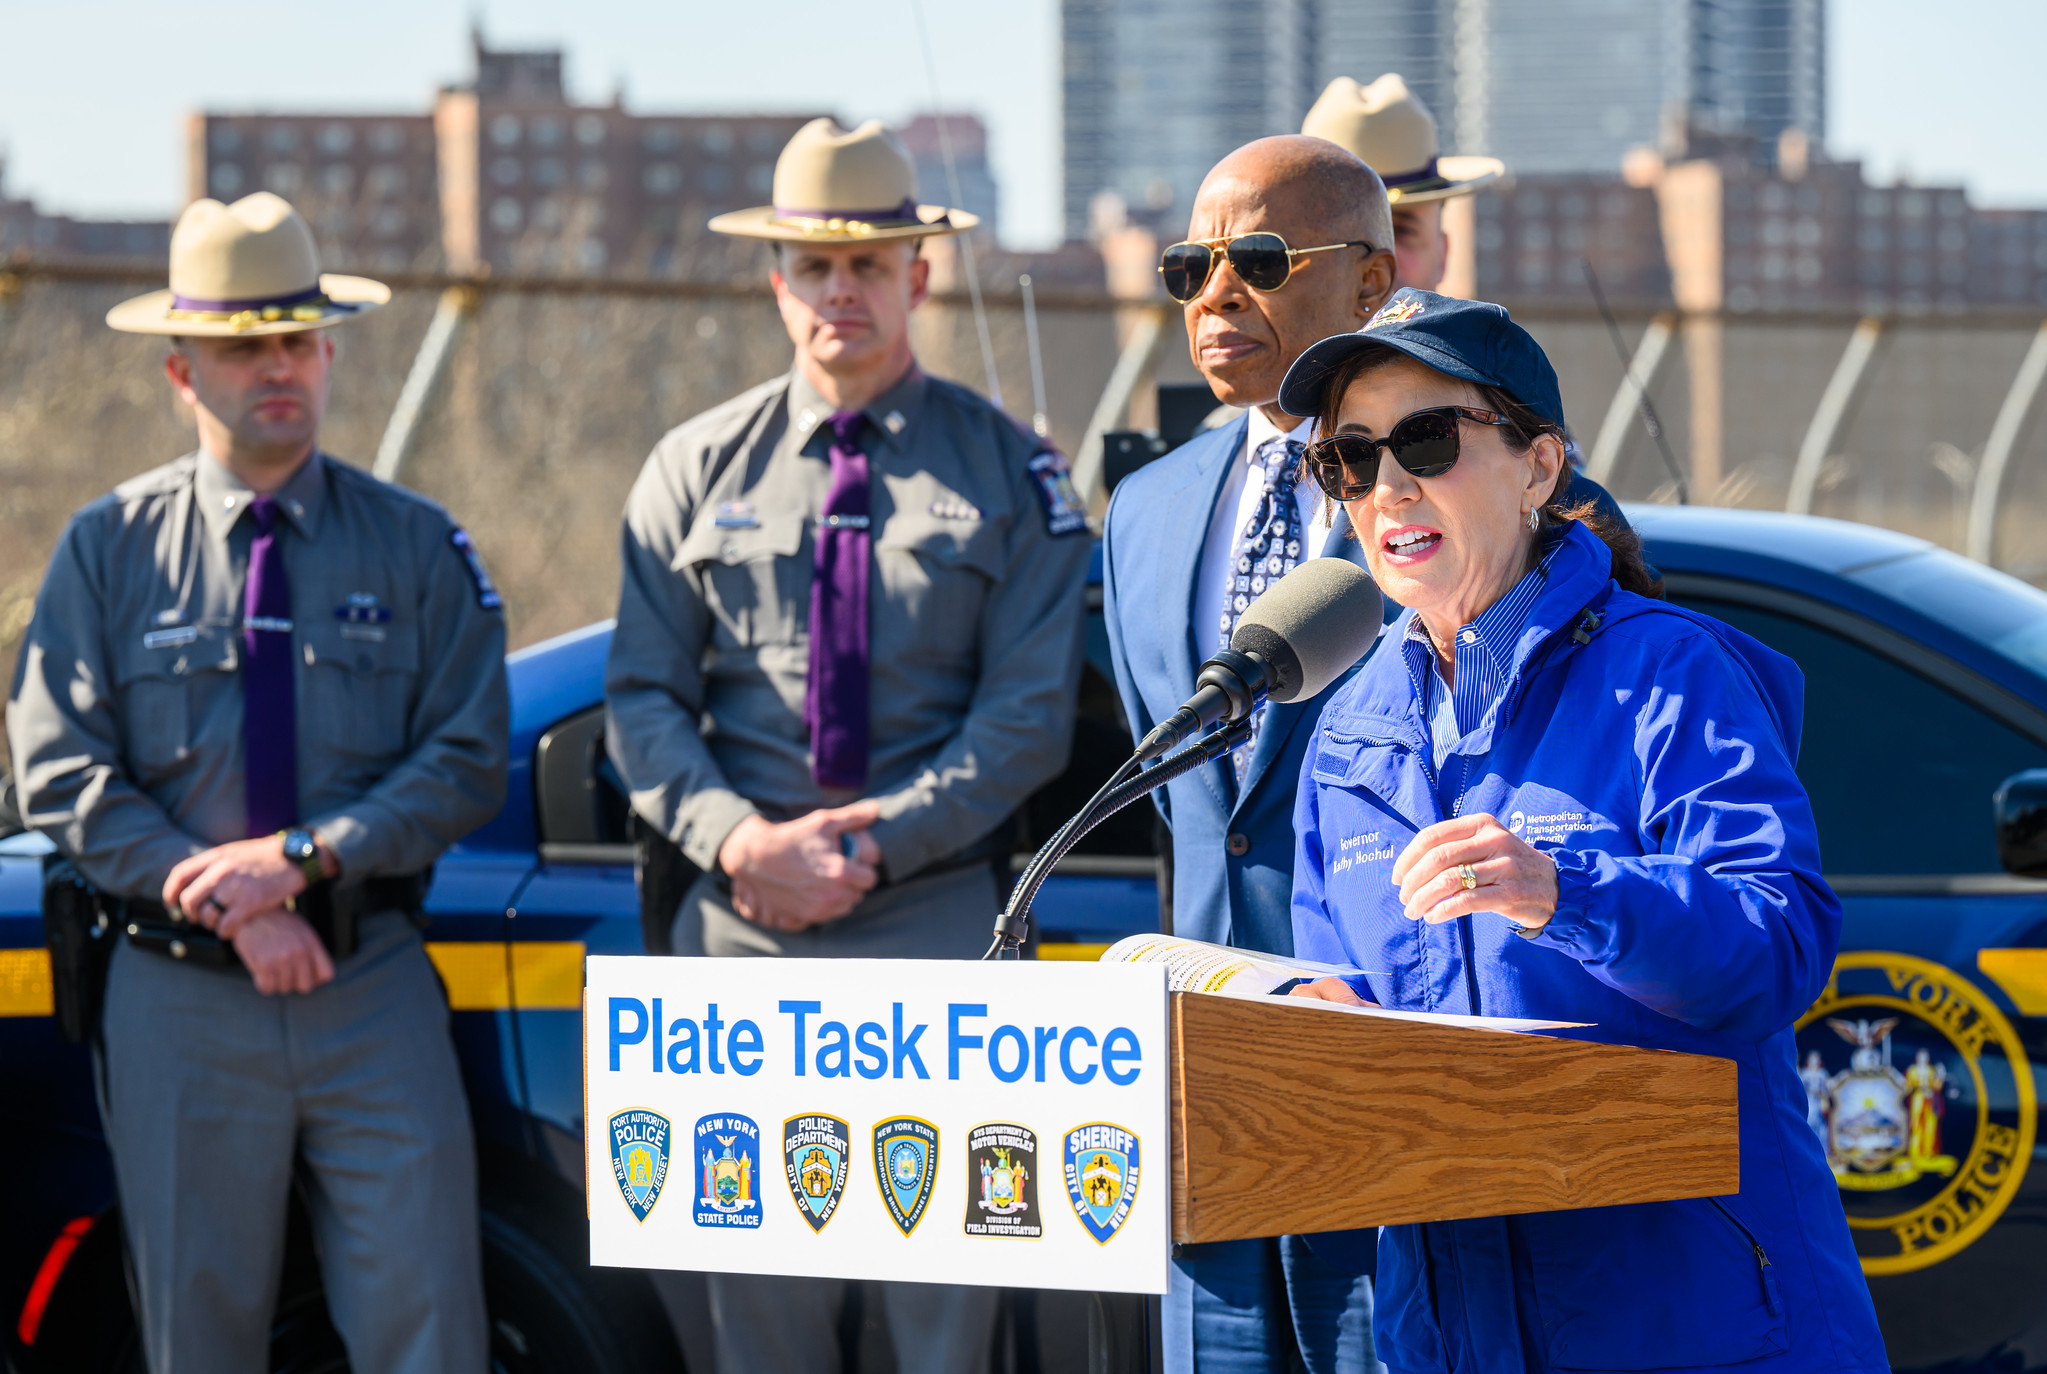 Gov. Kathy Hochul, wearing sunglasses and a blue windbreaker, stands alongside Mayor Eric Adams and State Troopers at a news conference on toll evaders.